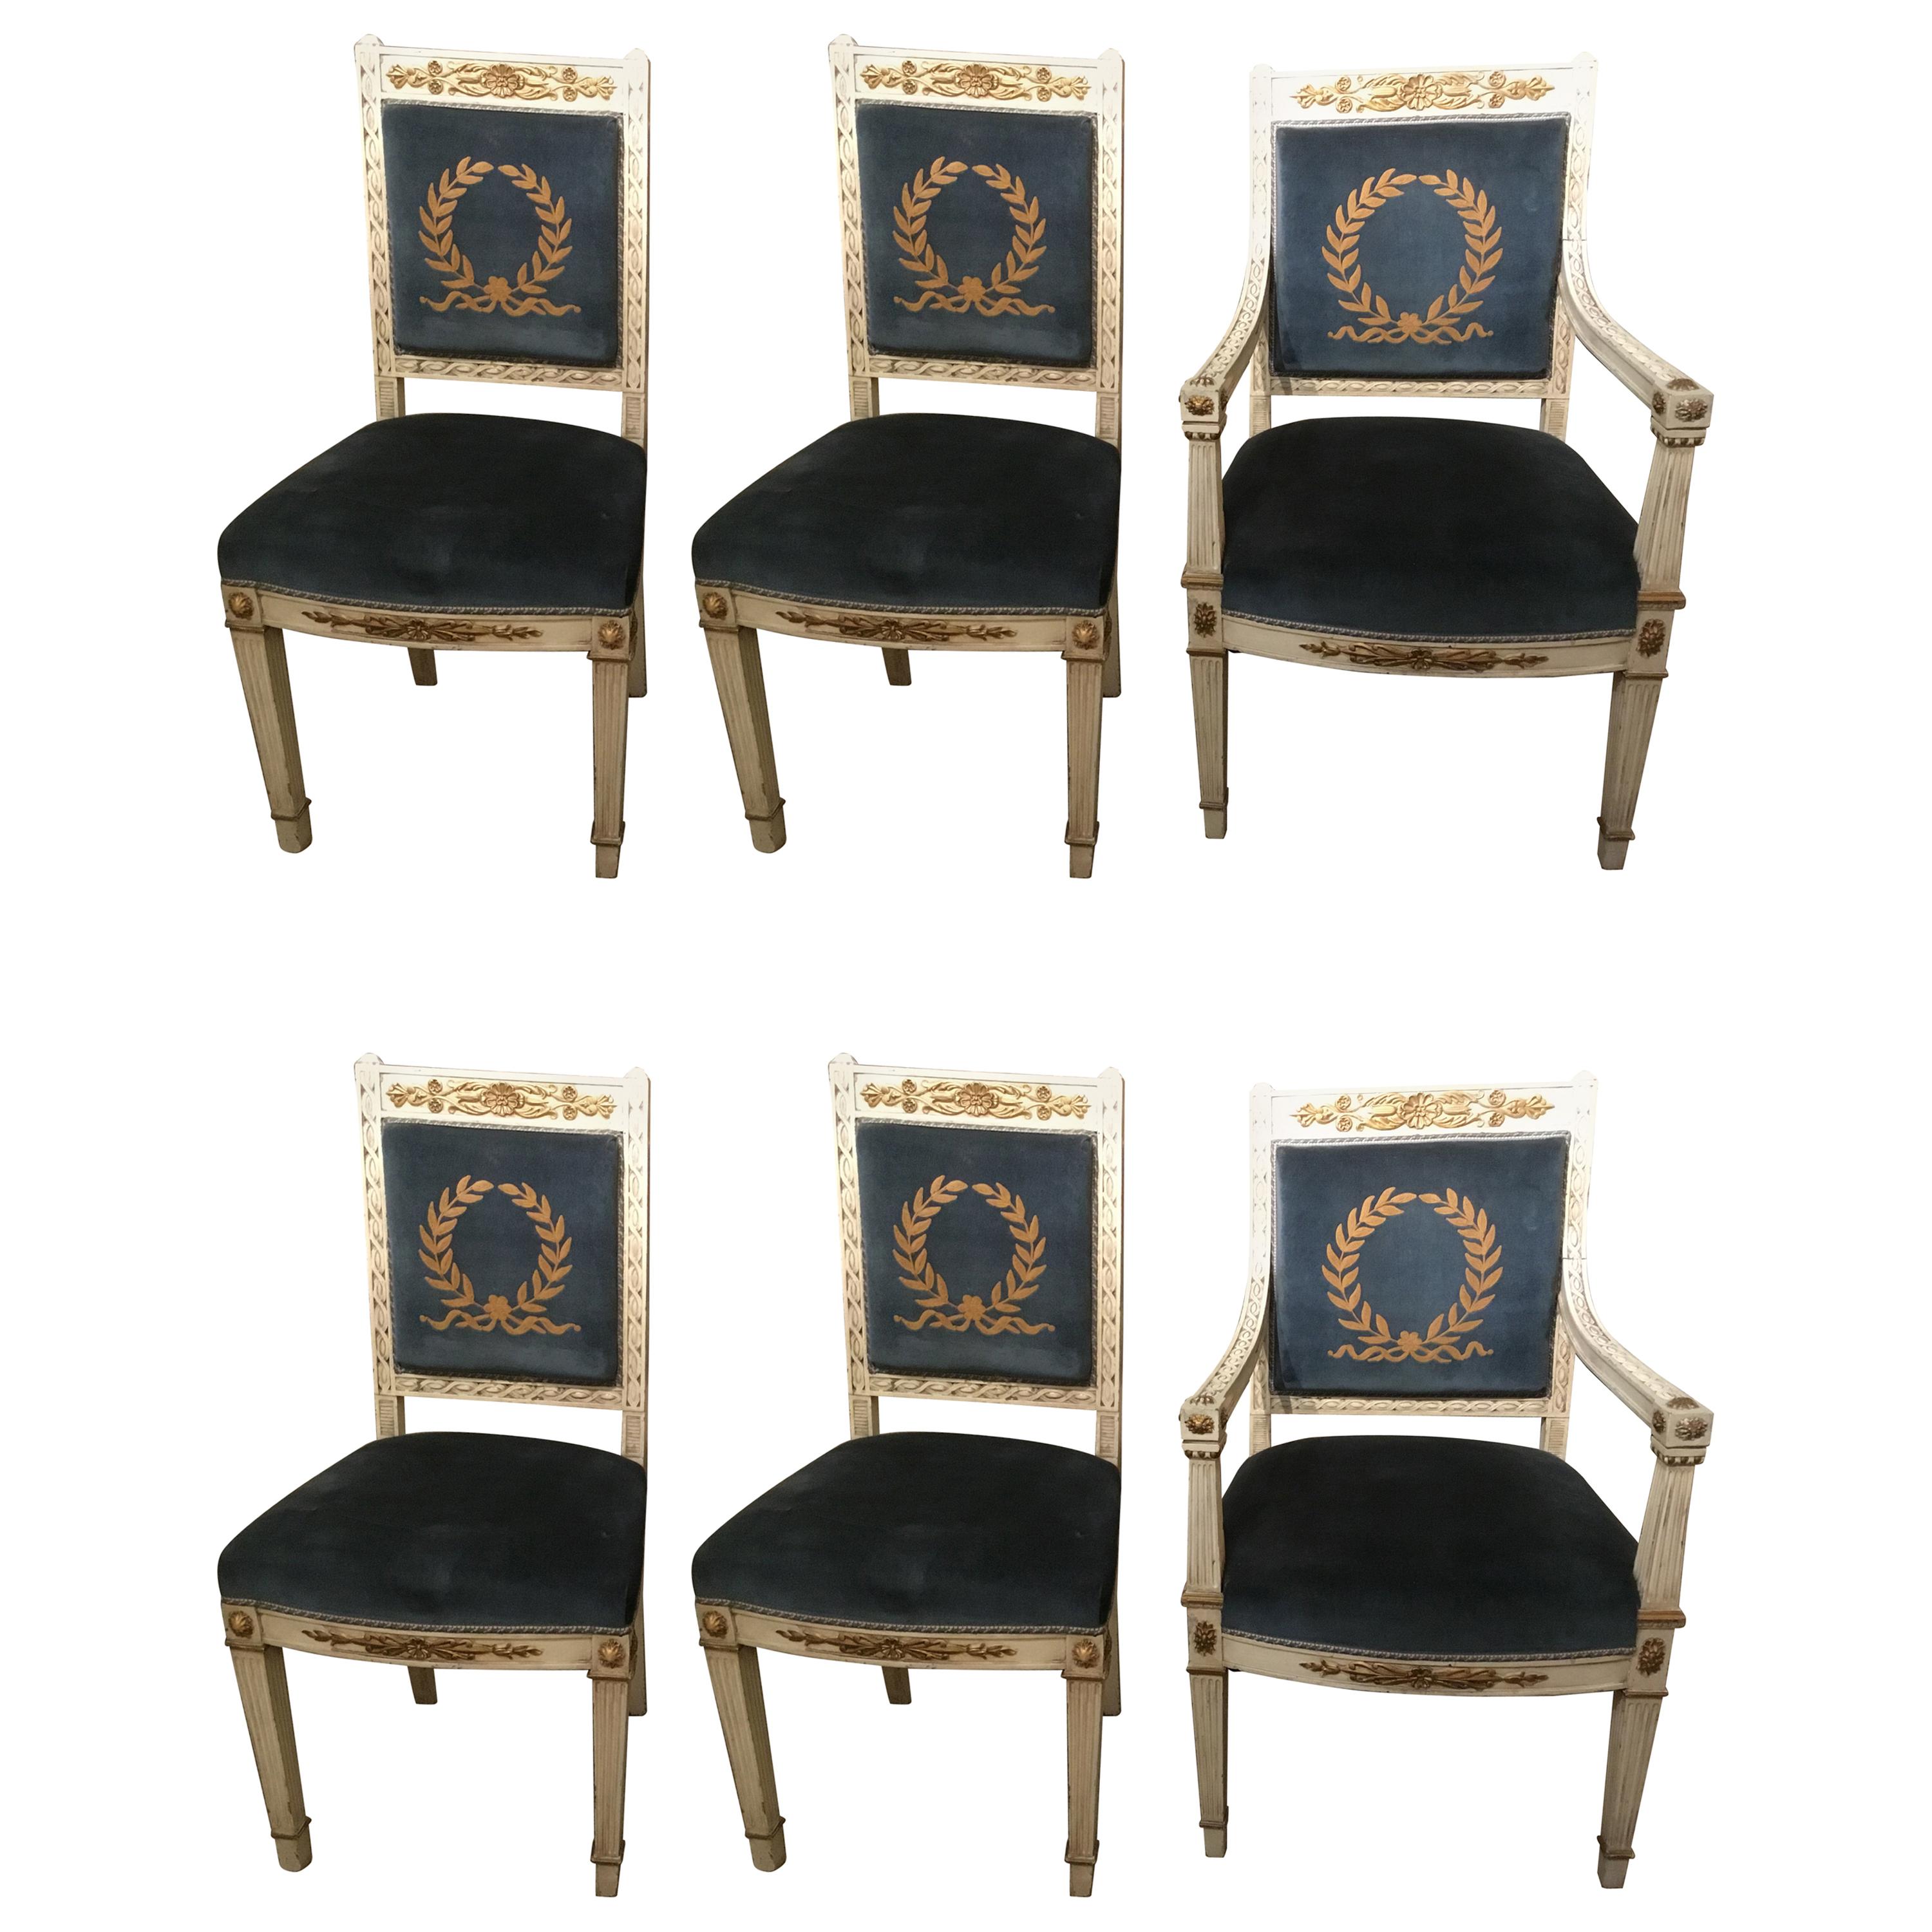 Set of Six Painted Antique Empire Style Dining Chairs with Gilt Embellishments